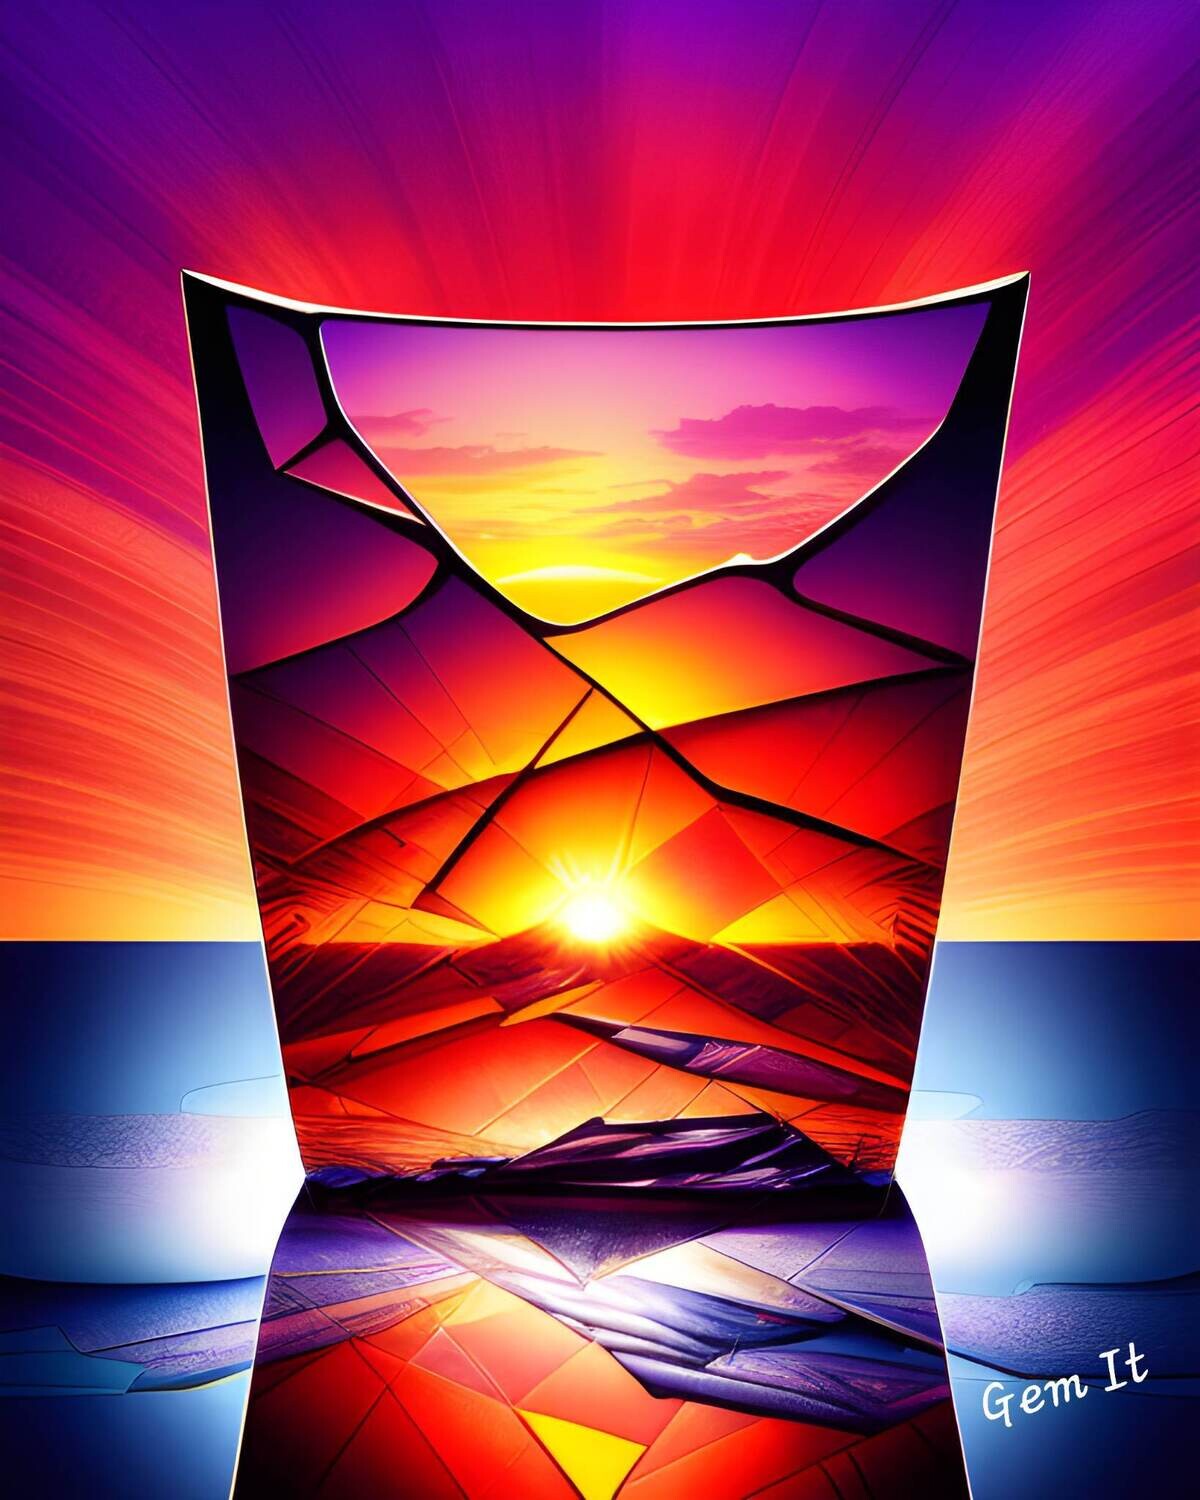 Fractured Glass Sunset 625 - Specially ordered for you. Delivery is approximately 4 - 6 weeks.